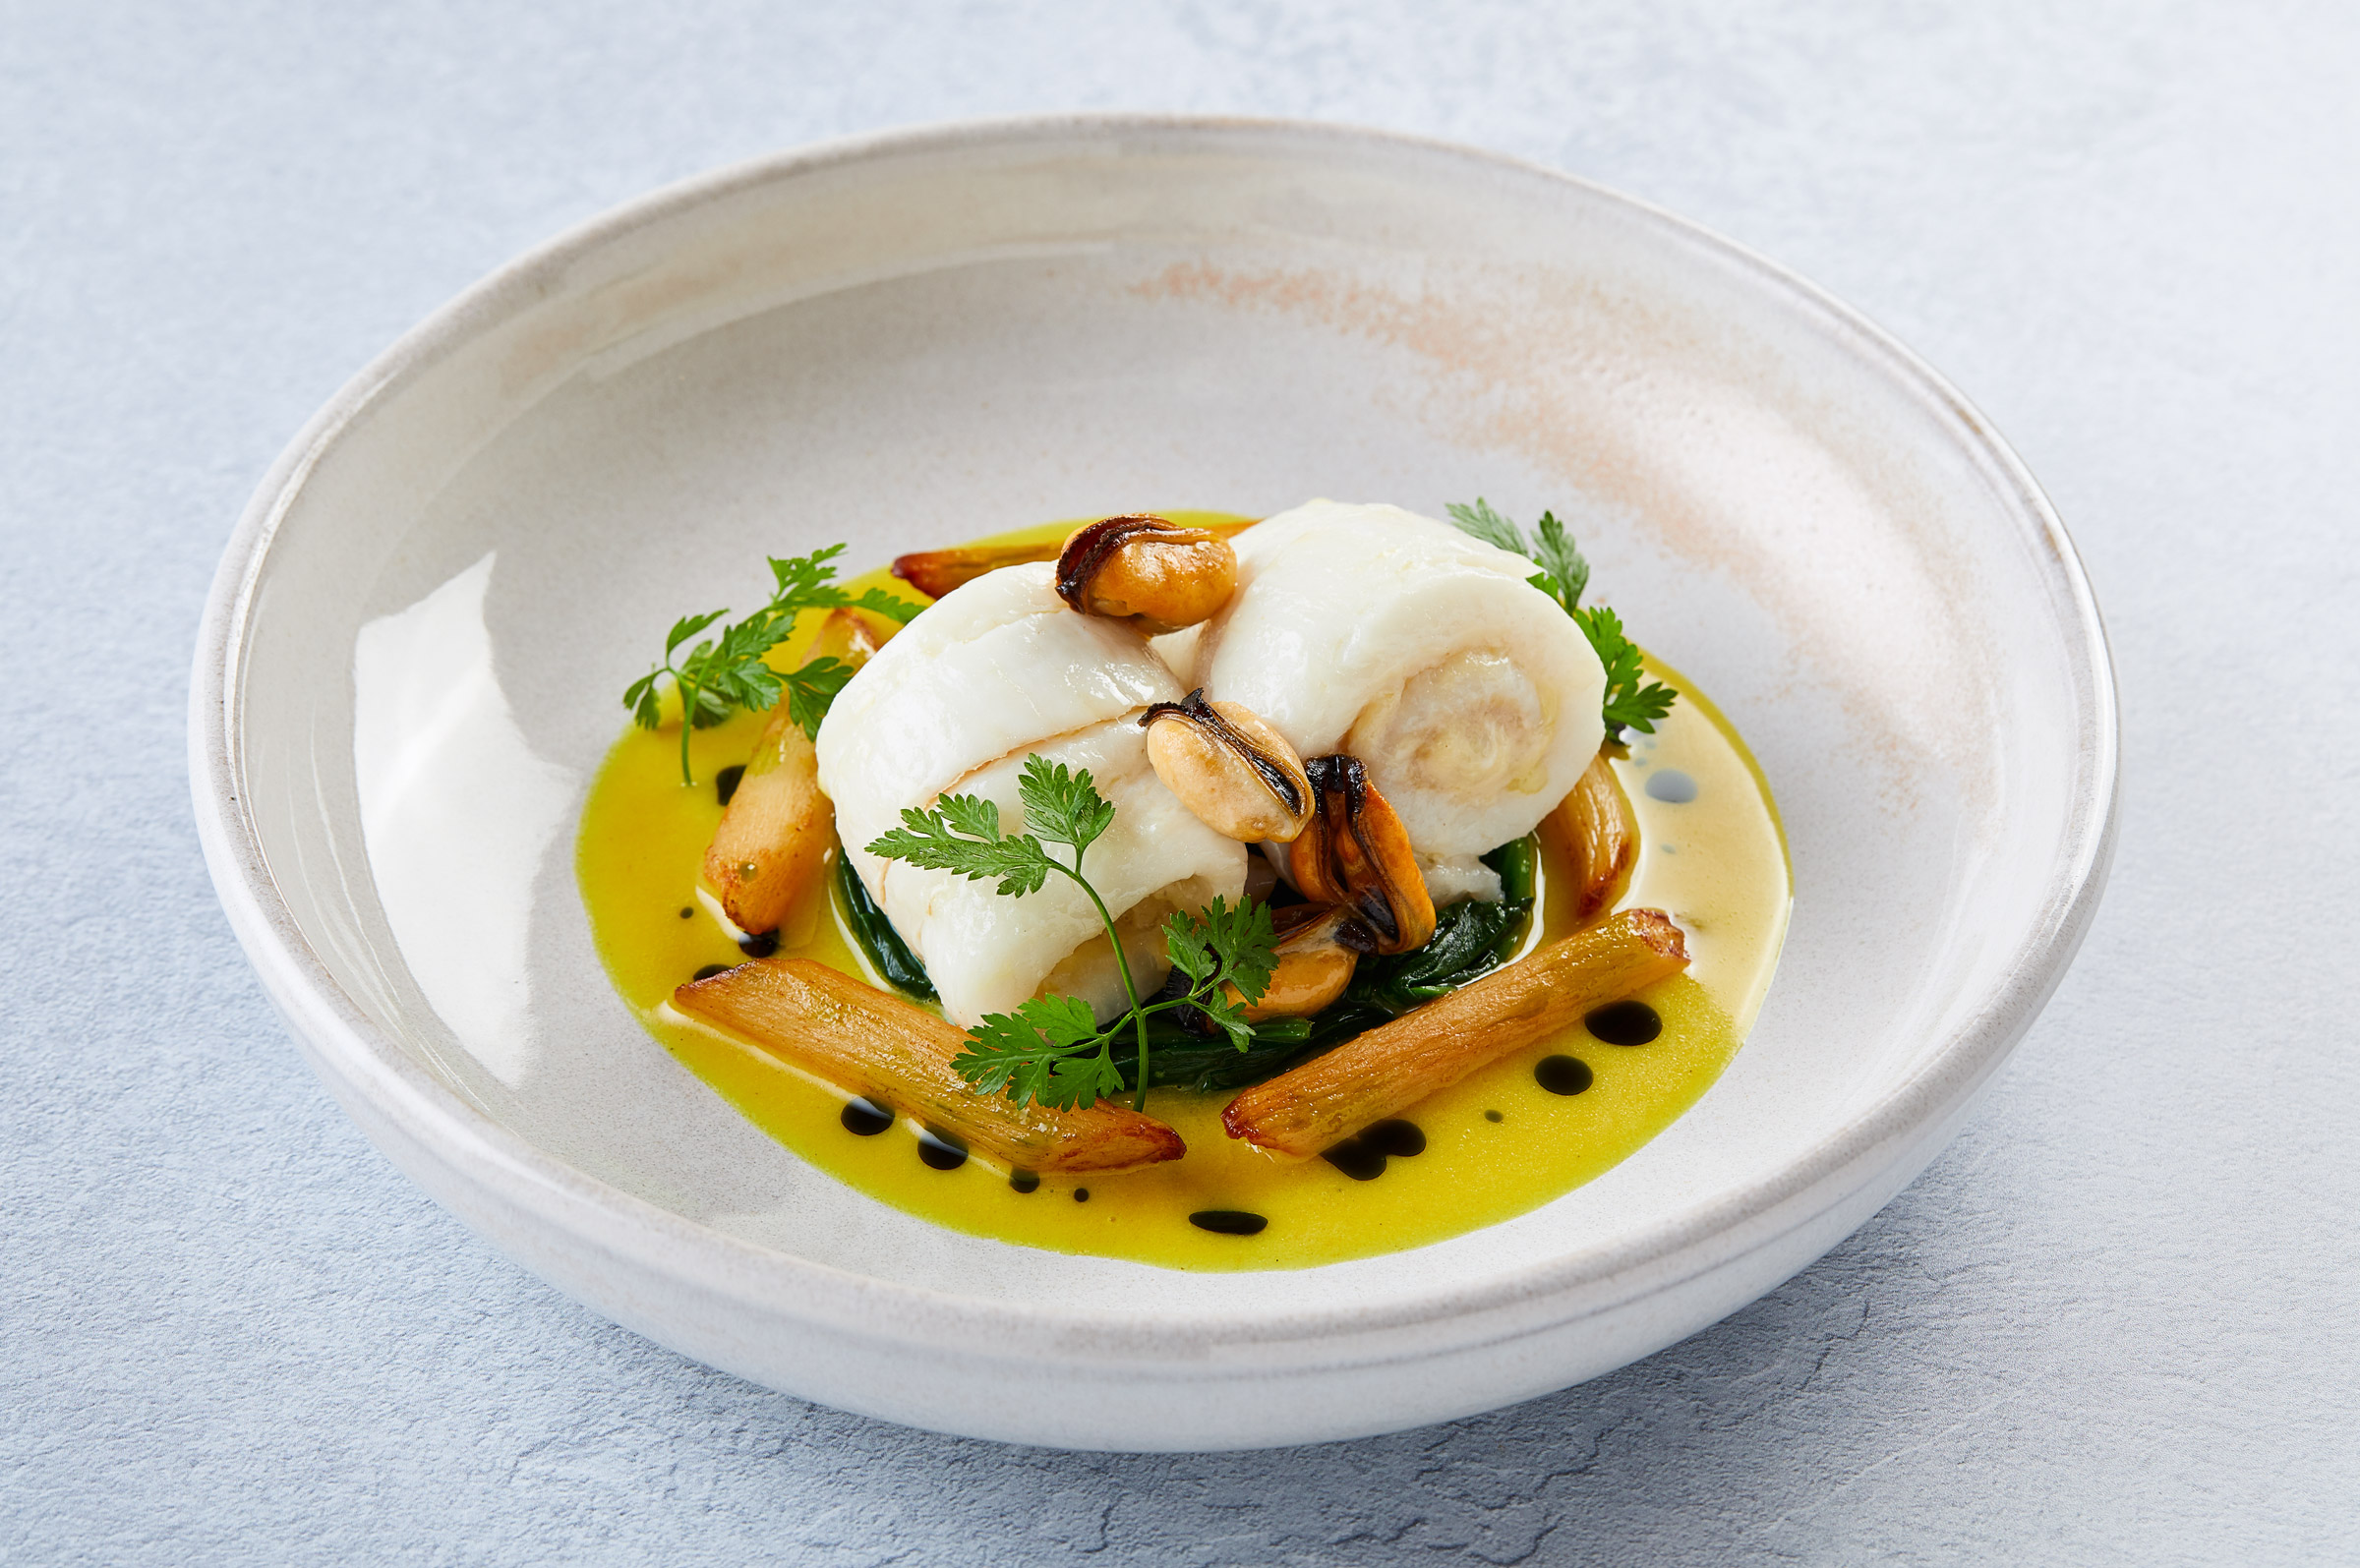 Sole Salsify & Mussels at Fingal Hotel. Alastair Ferrier photographer, Edinburgh food and drinks.